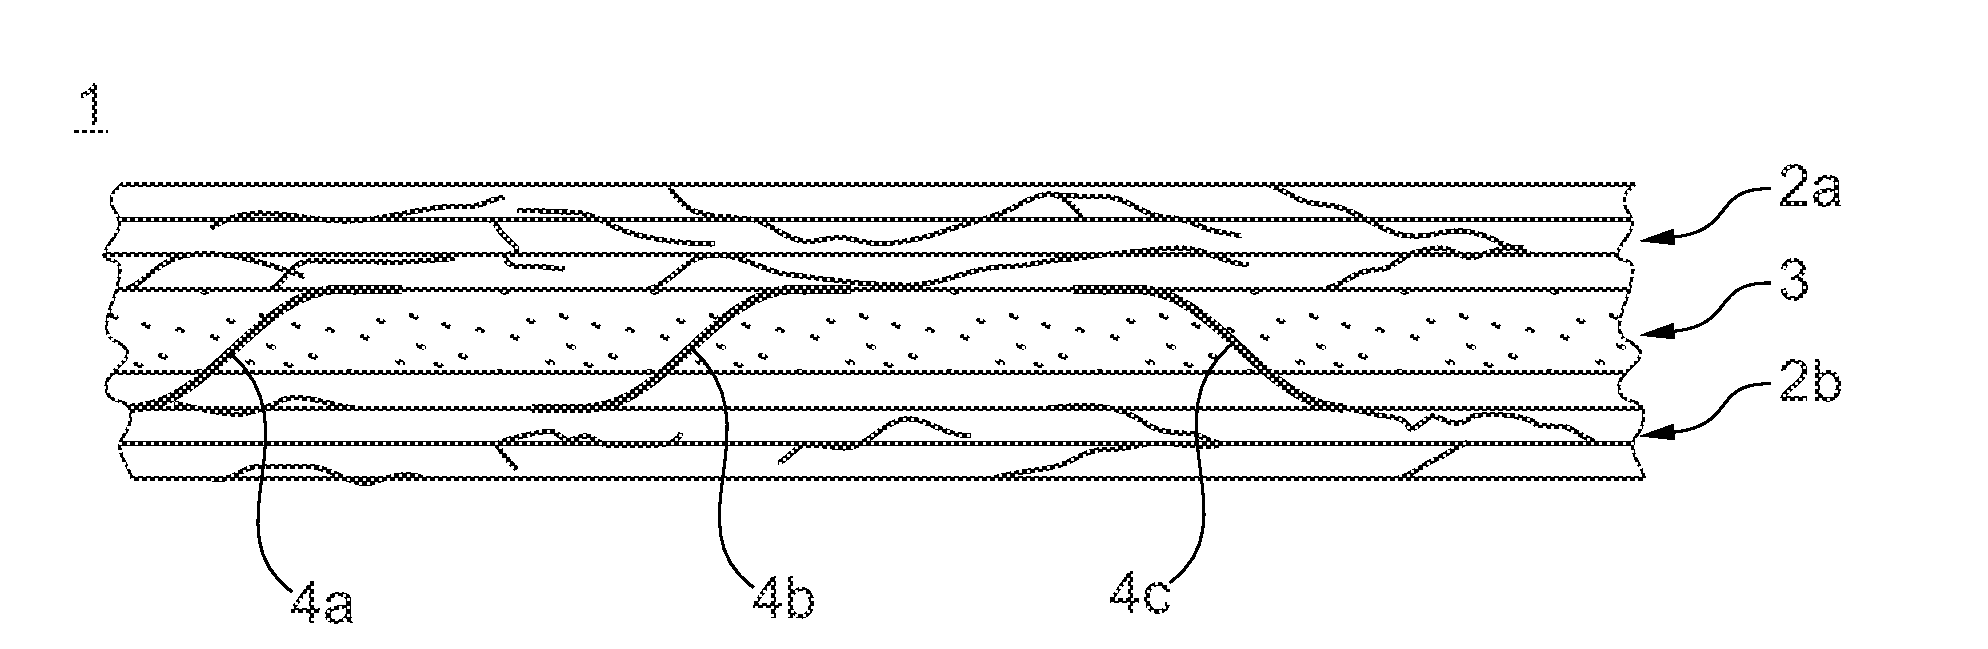 Fiber composite component with an electrically conductive fiber material for reinforcement as well as a device for its manufacture